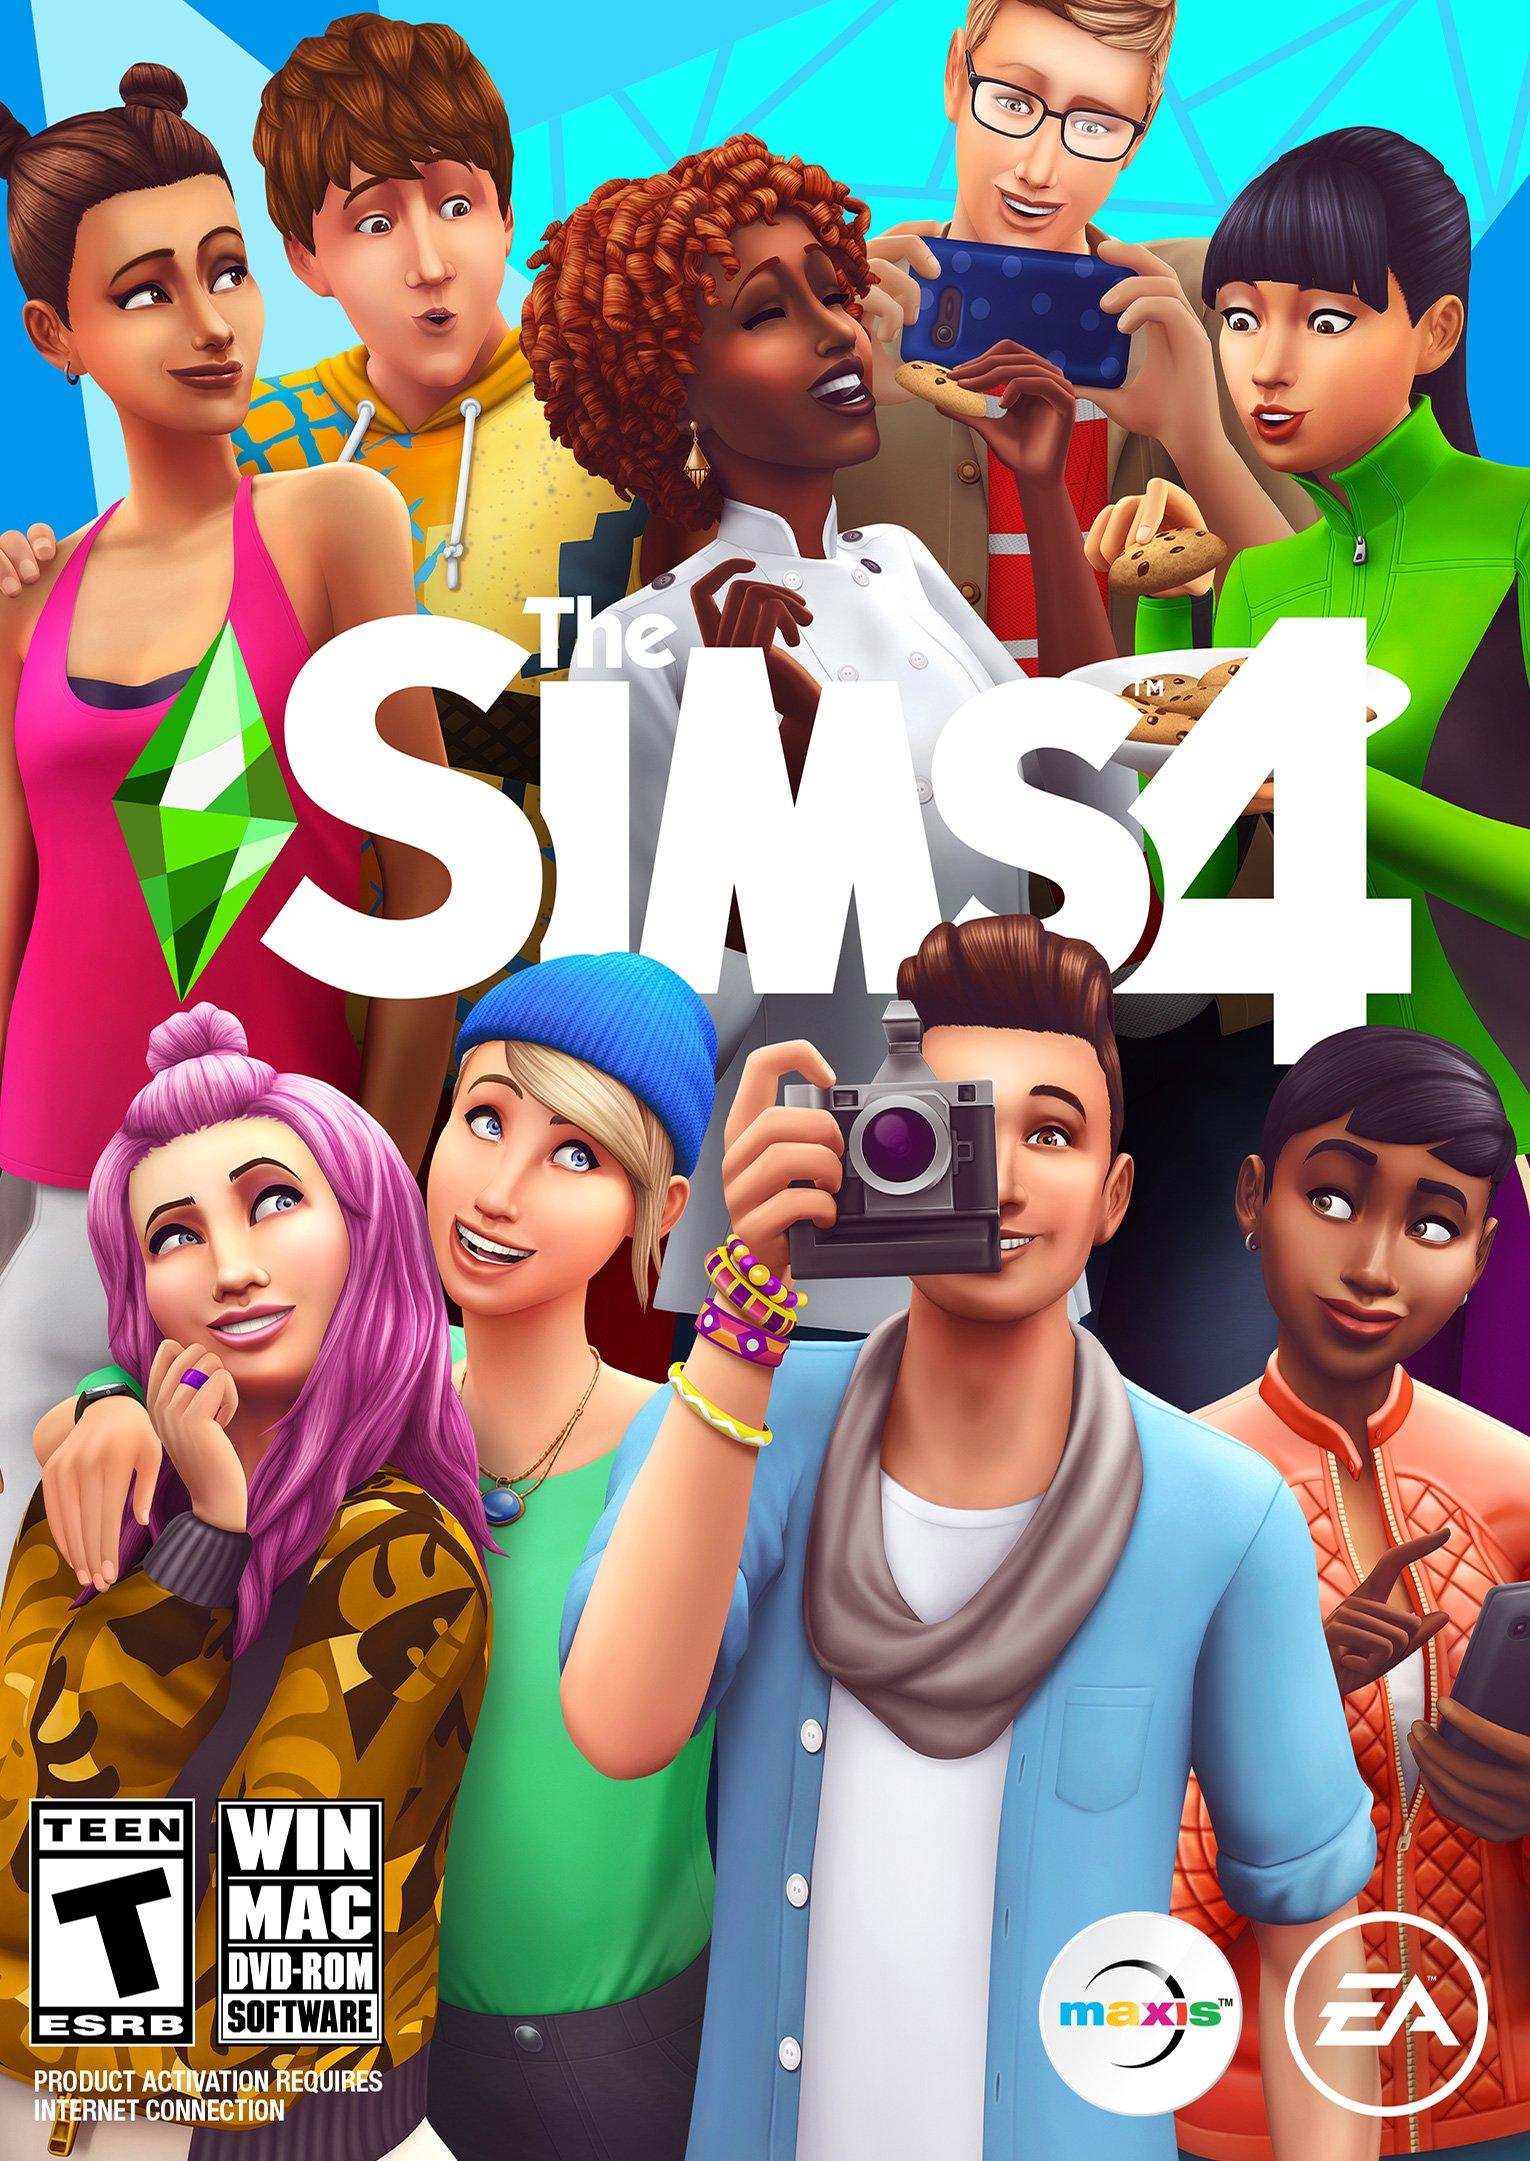 is there a sims game for switch